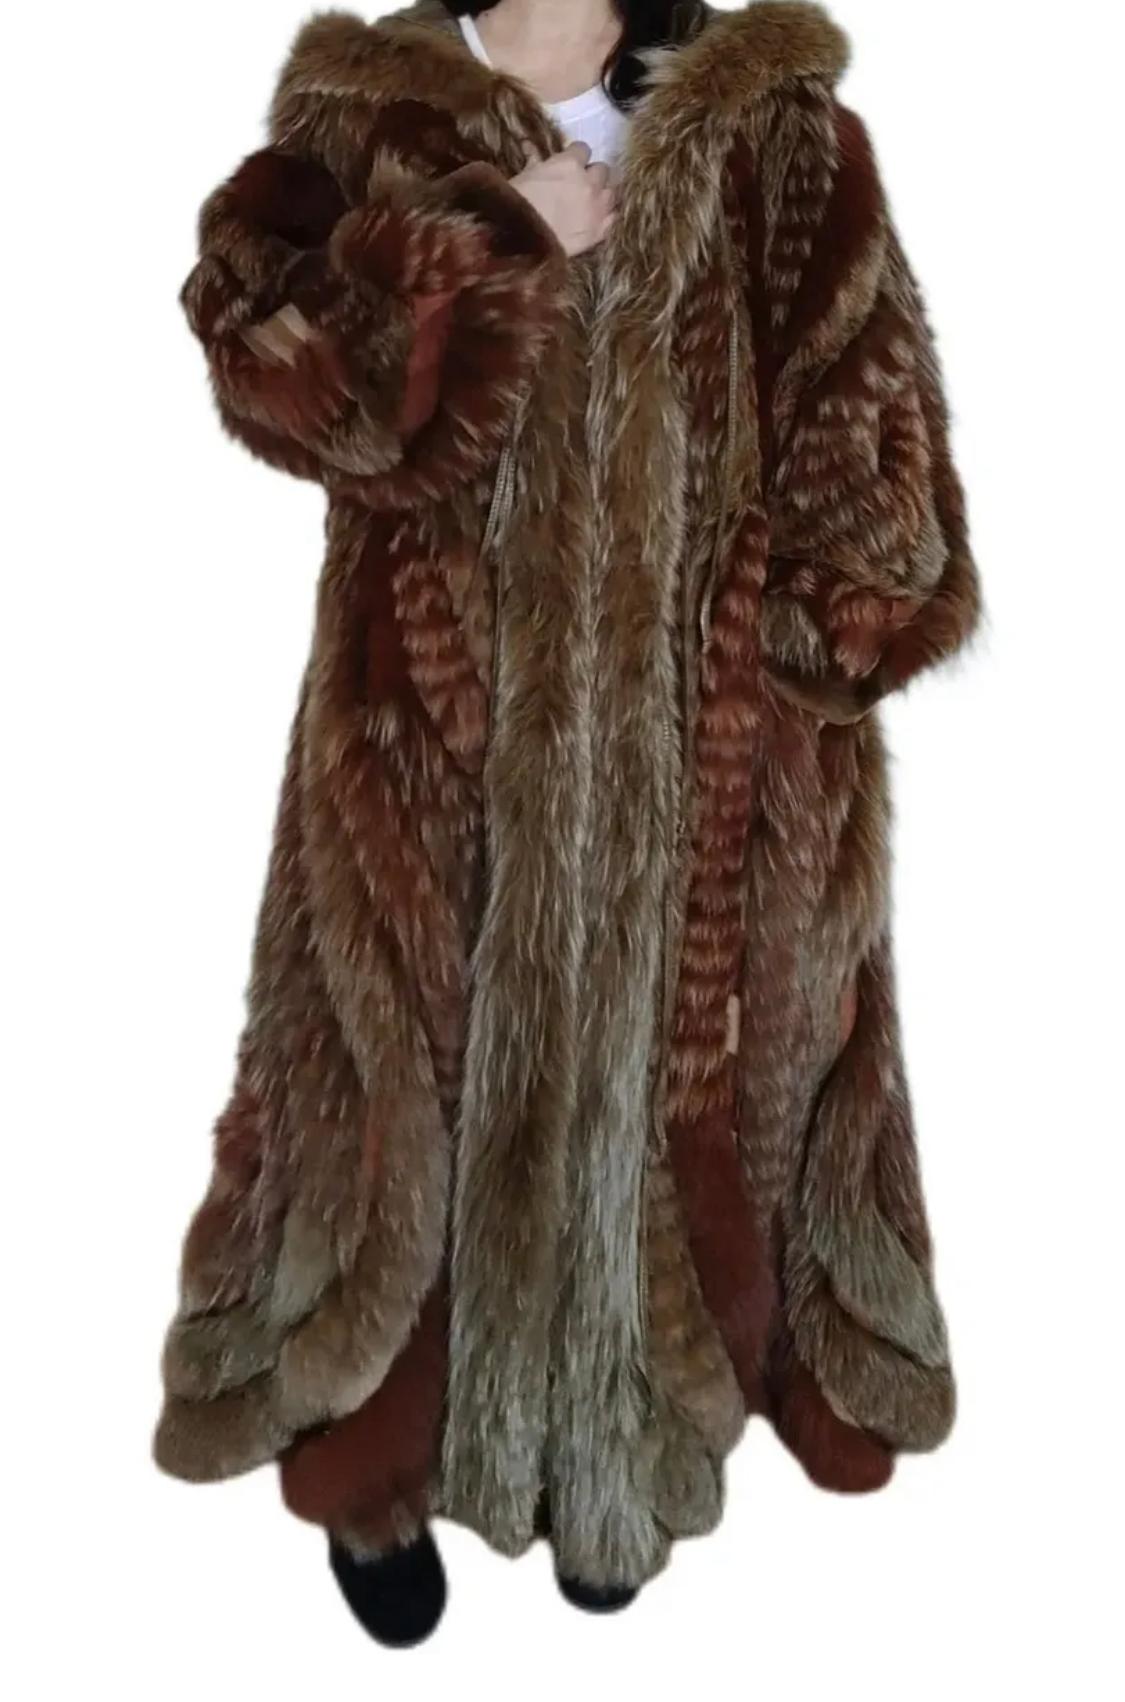 Mint reversible Christian Dior Multi Fur Coat fox beaver leather  (Size 12 - L)

When it comes to fur, Christian Dio is the ultimate reference in quality and style. This stunning Dior coat is a fantastical reversible with the original design and